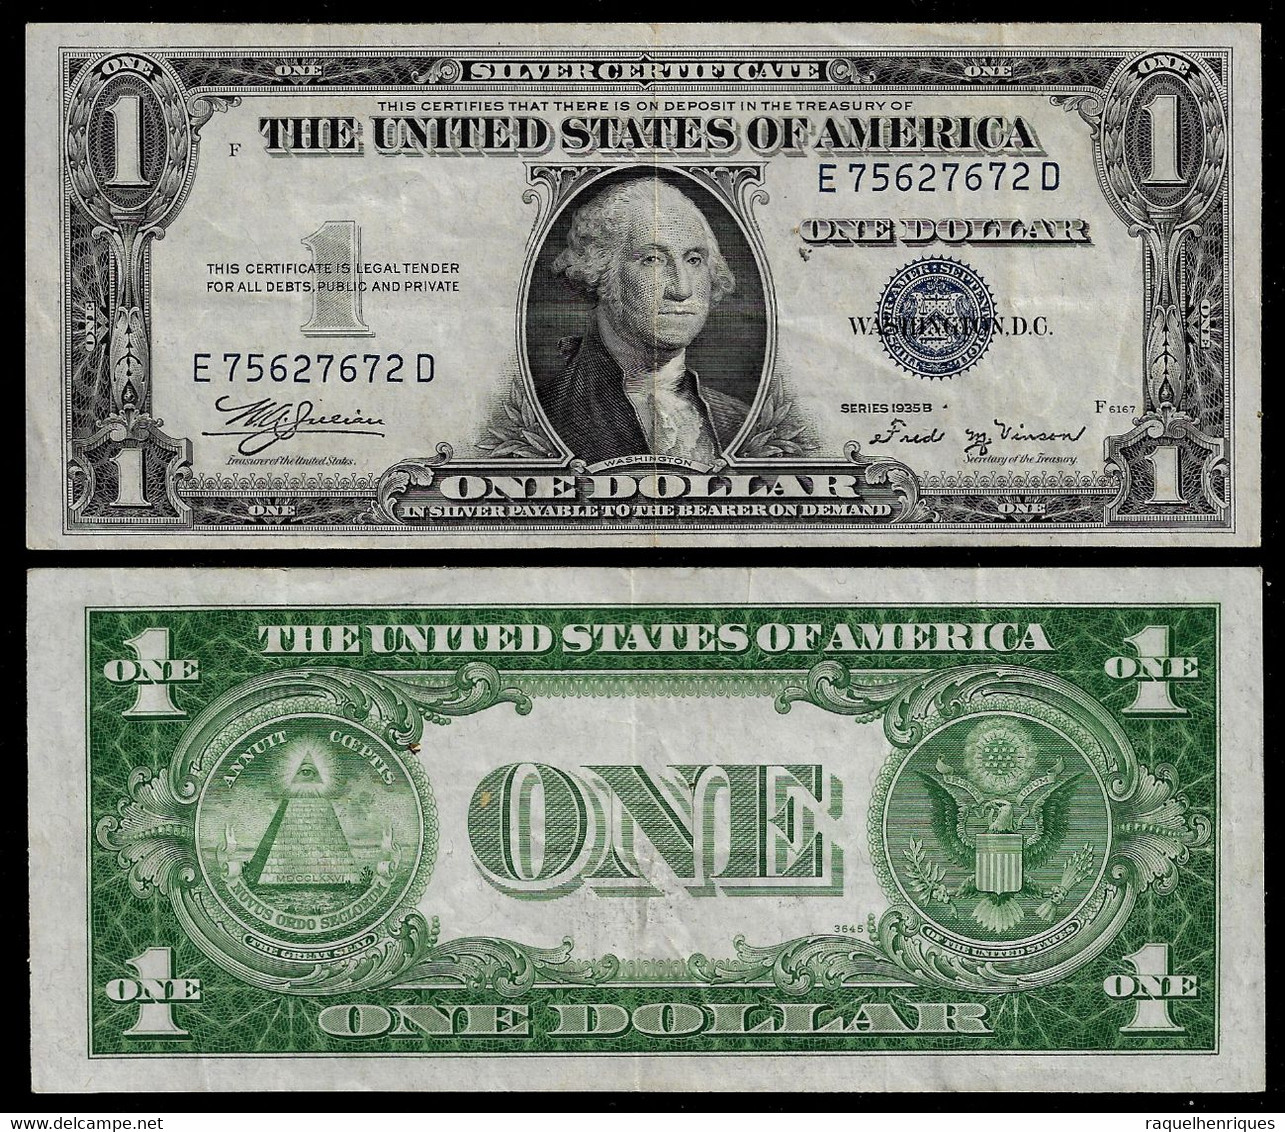 UNITED STATES SILVER CERTIFICATE BANKNOTE - 1 DOLLAR 1935B - BLUE SEAL - VF (NT#03) - Certificats D'Argent (1928-1957)